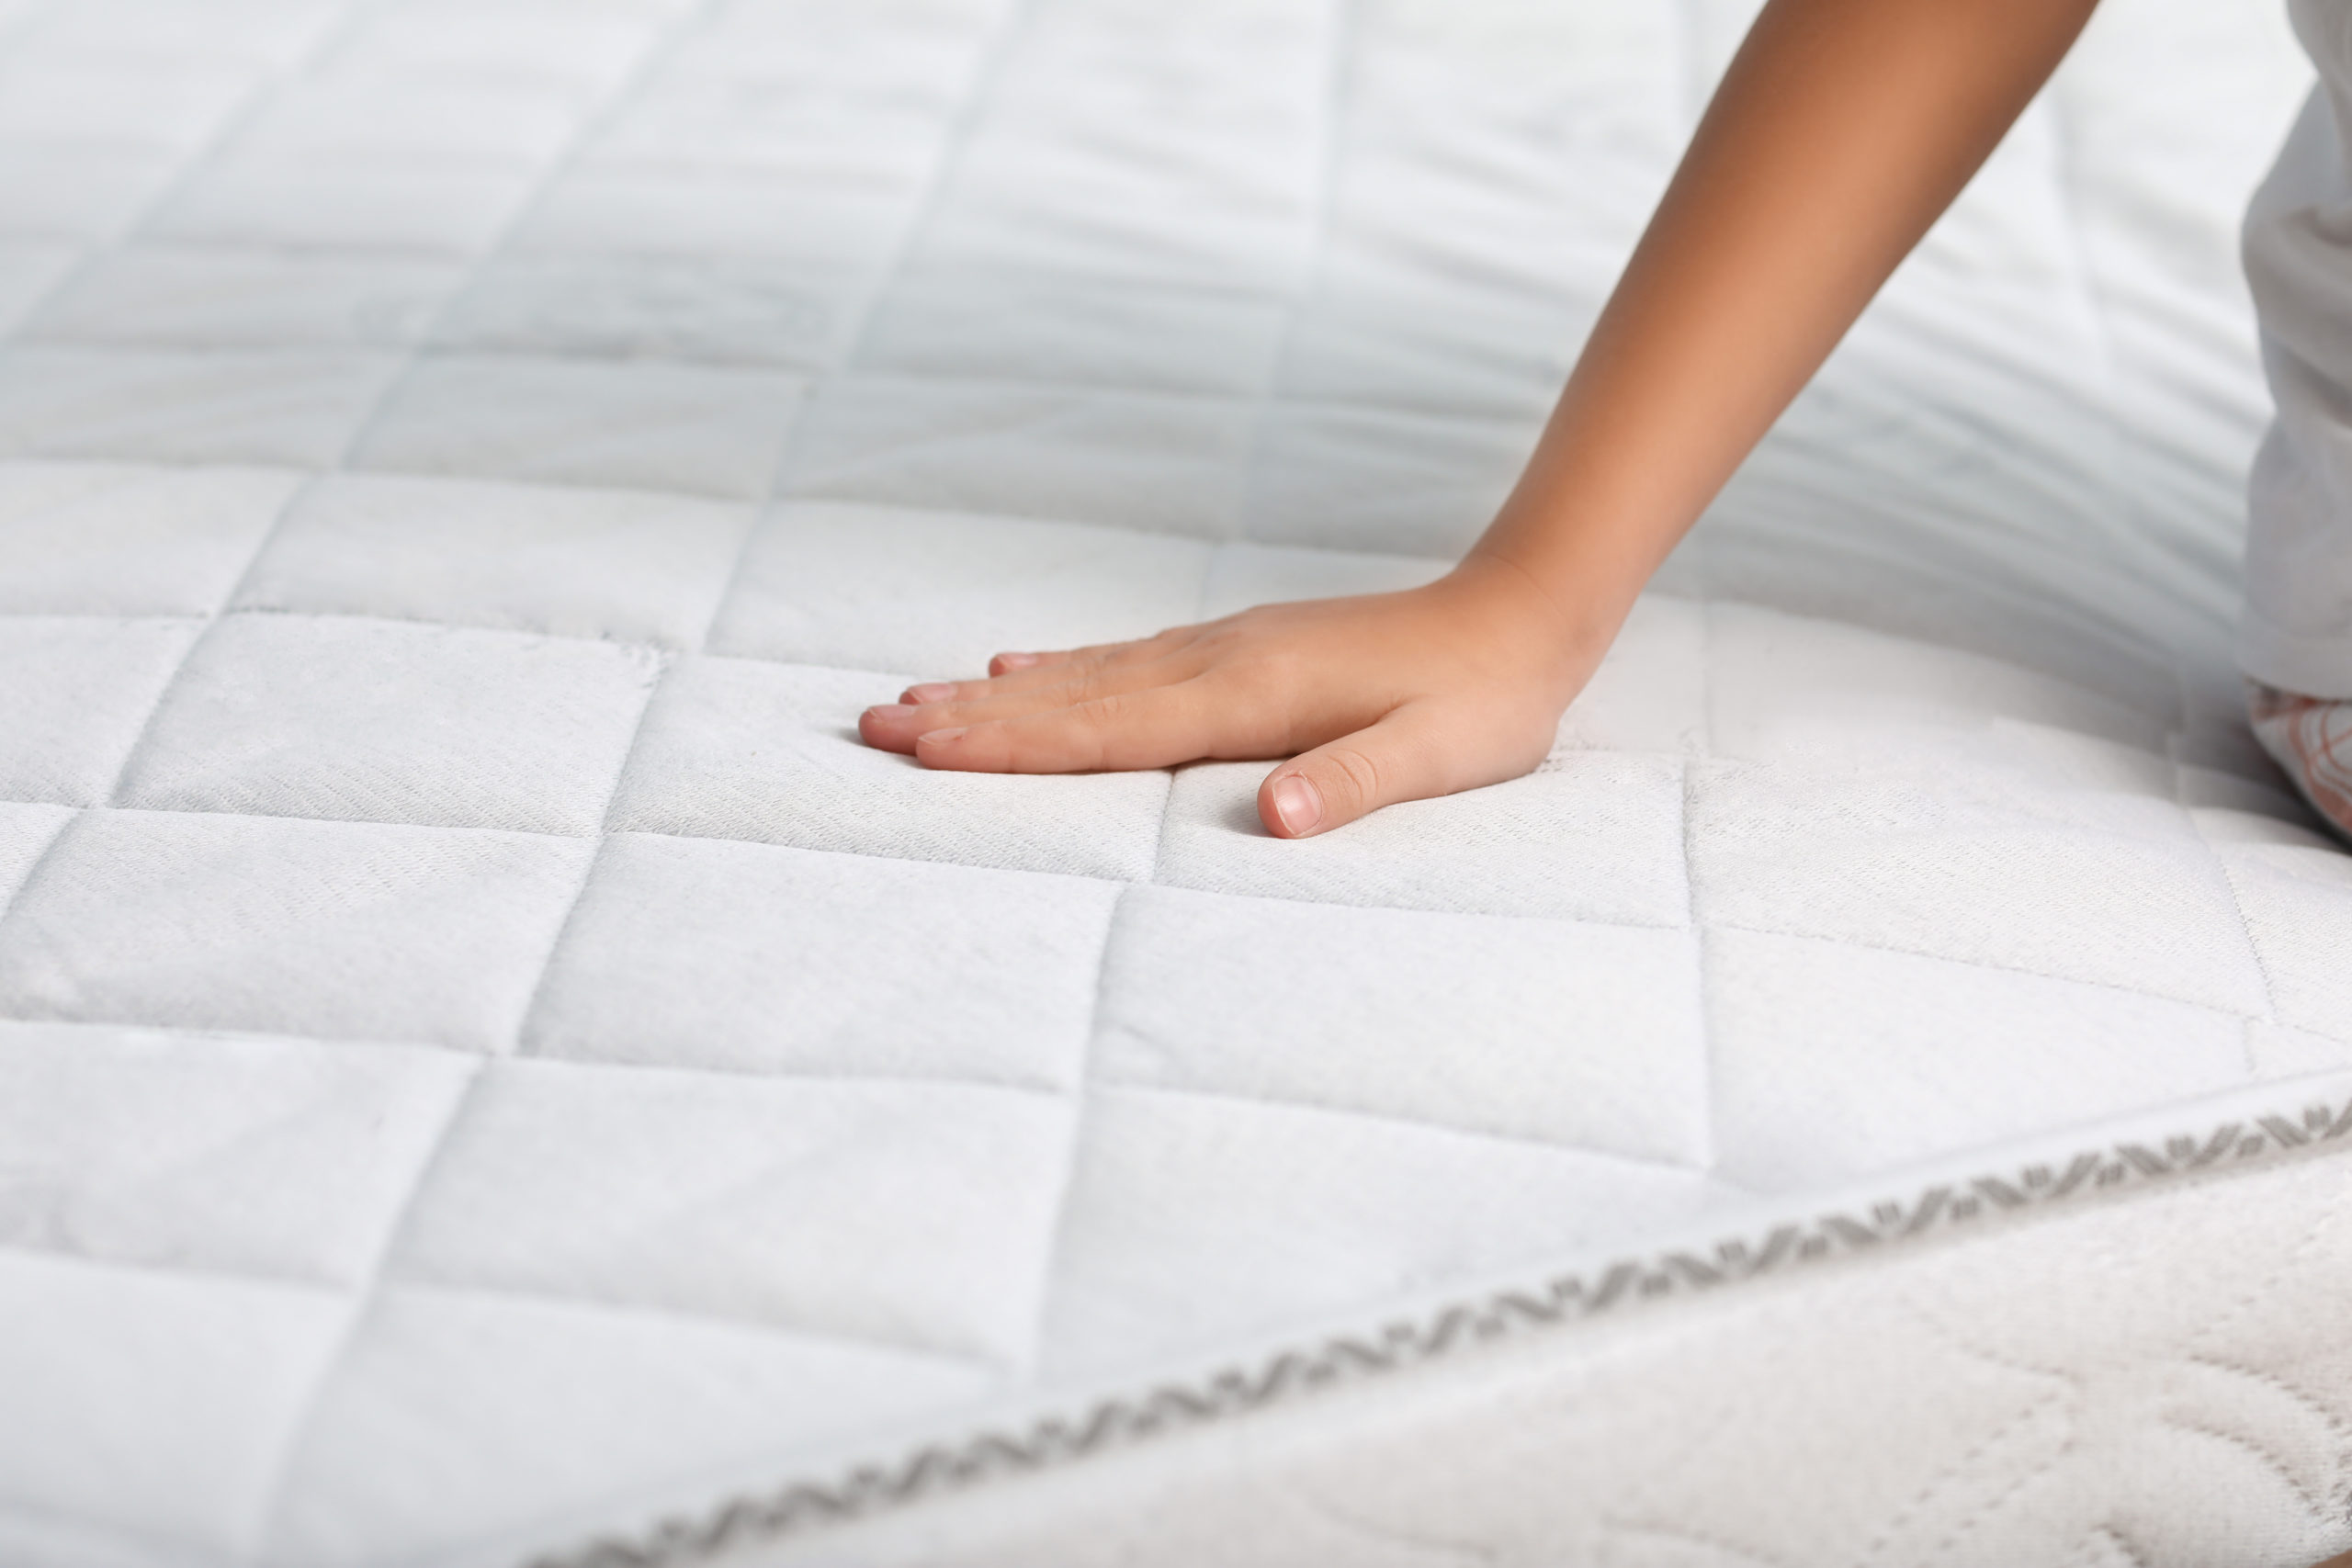 How to choose a perfect mattress?